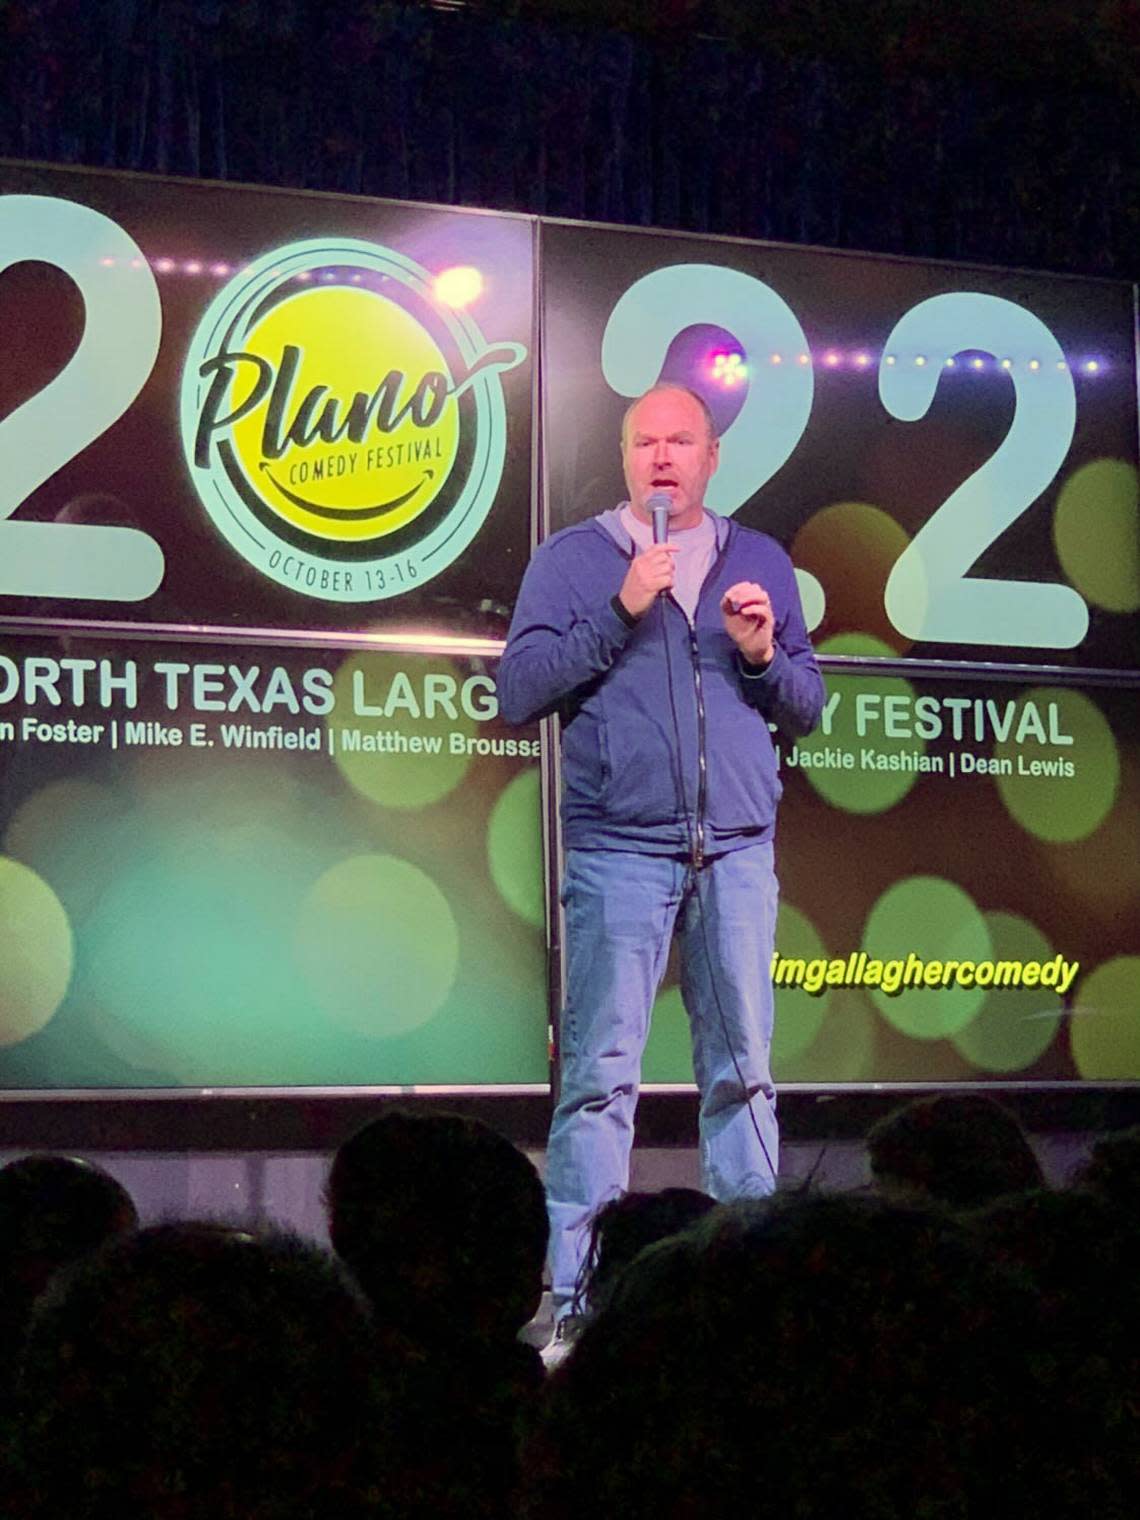 Jim Gallagher performs at the Plano Comedy Festival in Plano, Texas in Oct of 2022. He is scheduled to perform at The Loft in downtown Columbus, Georgia on Thursday, Feb. 9, 2023.